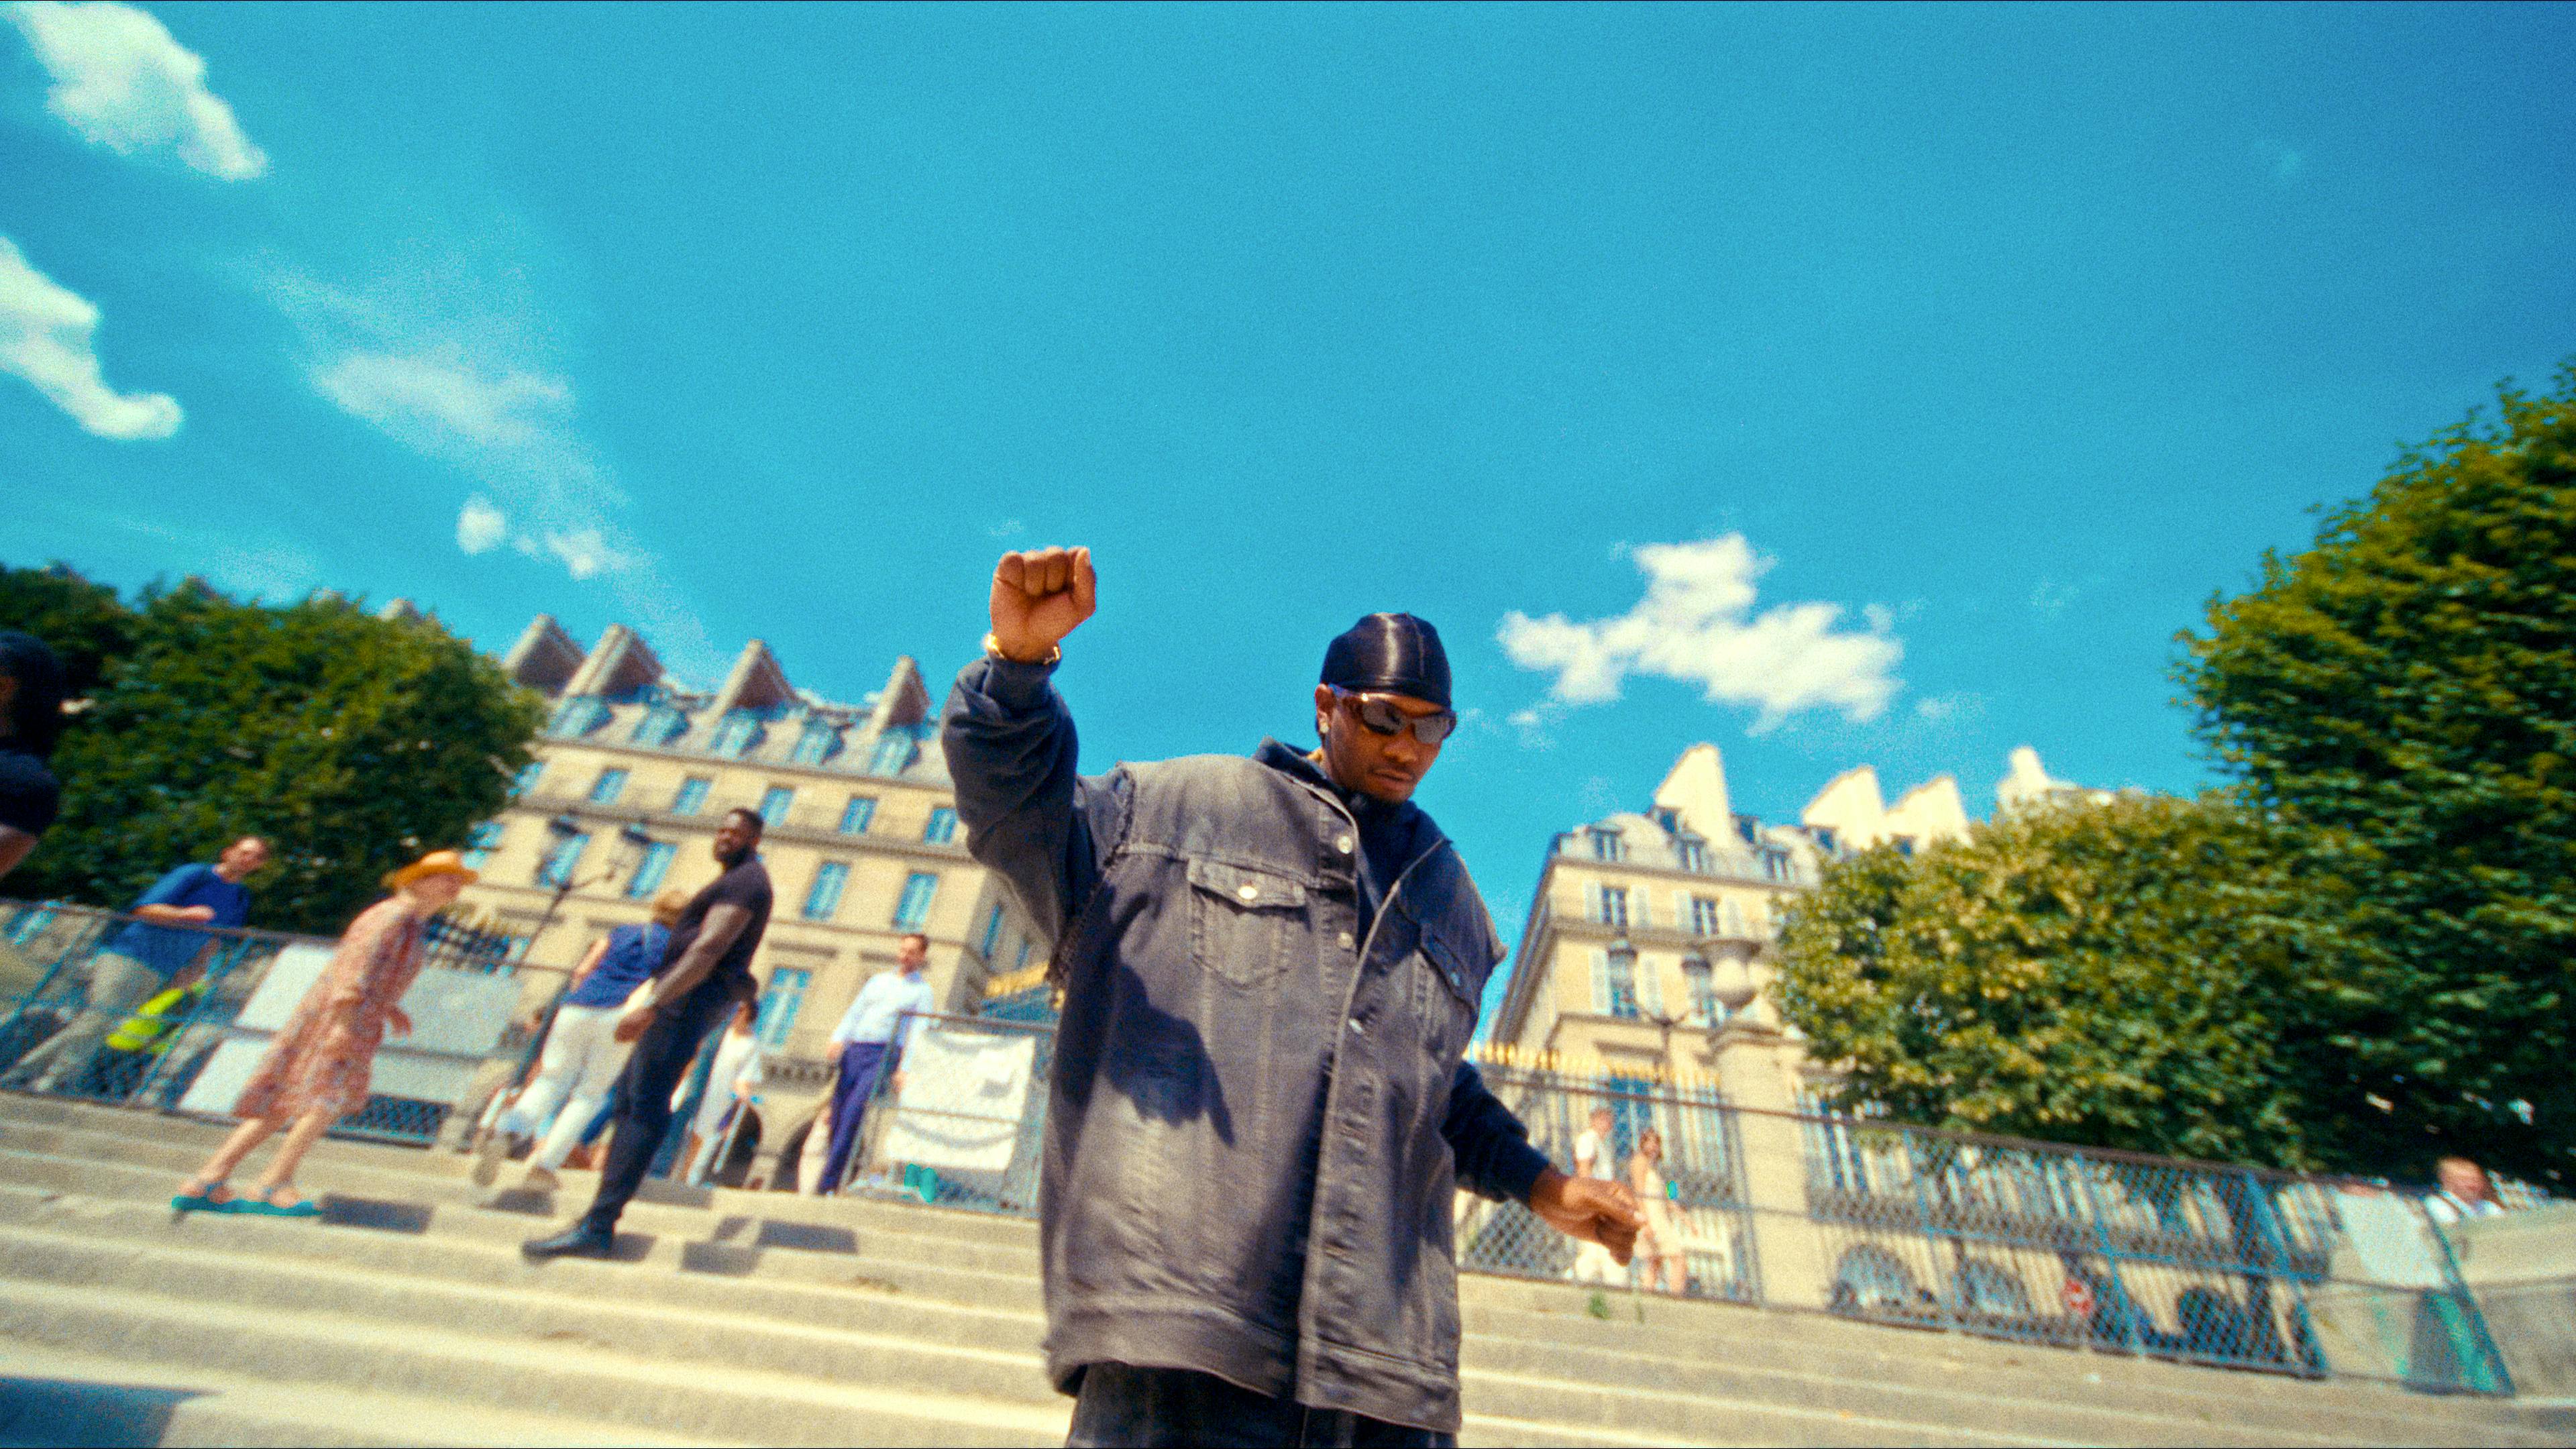 Offset dancing on a stair case in Paris